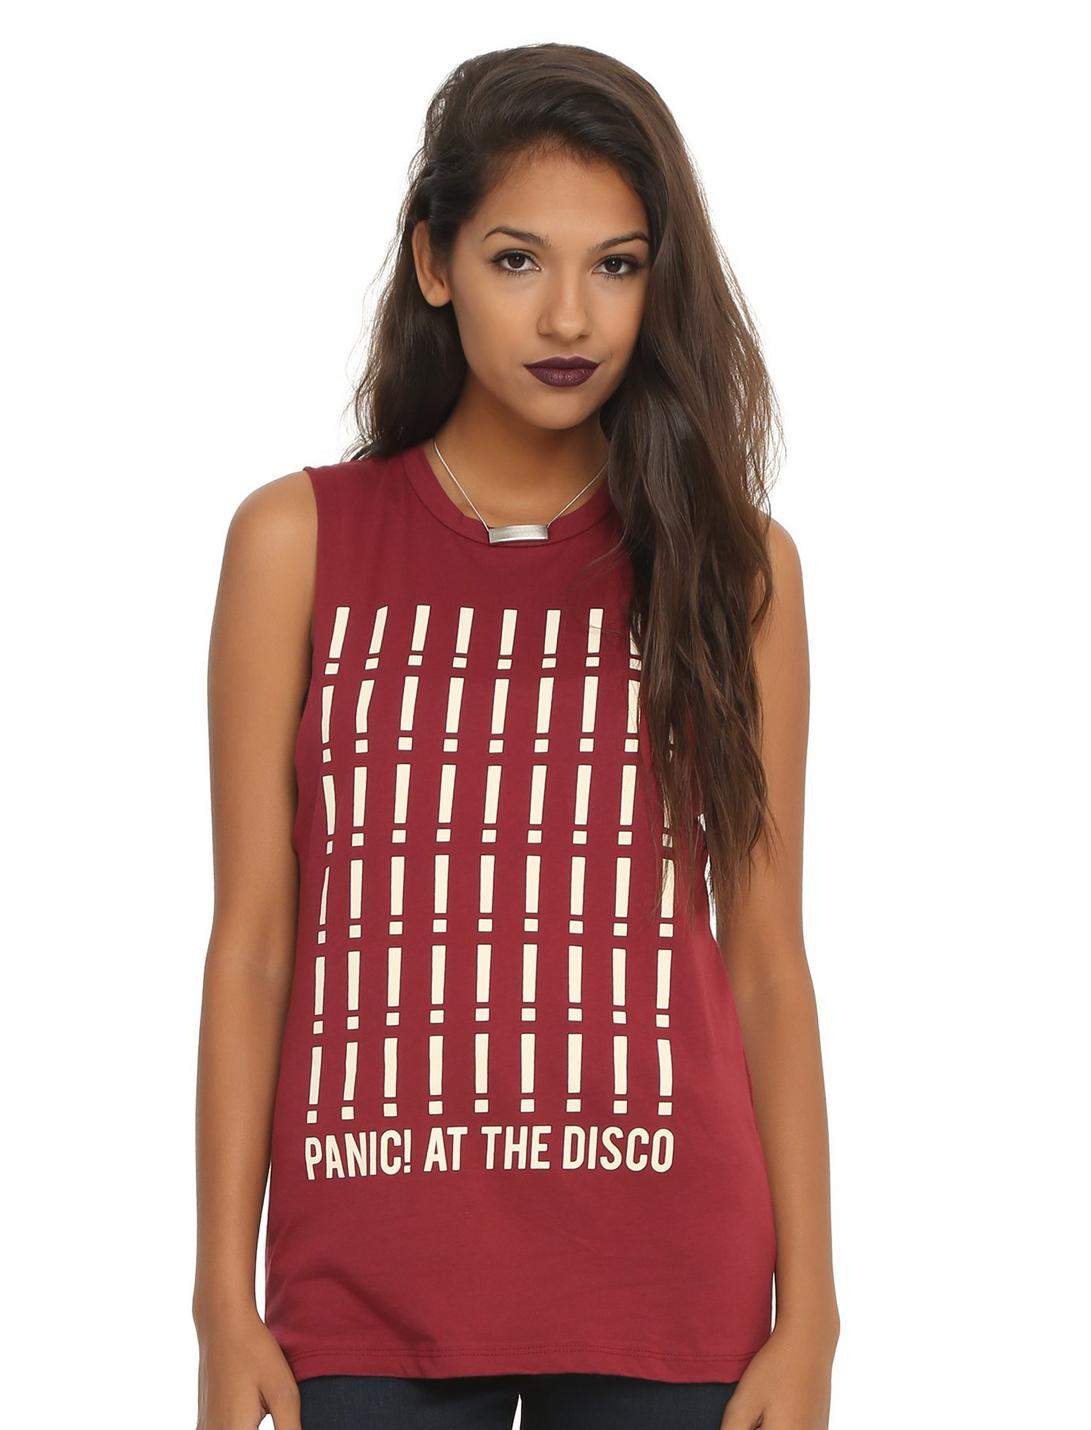 Panic! At The Disco Exclamation Girls Muscle Top, , hi-res